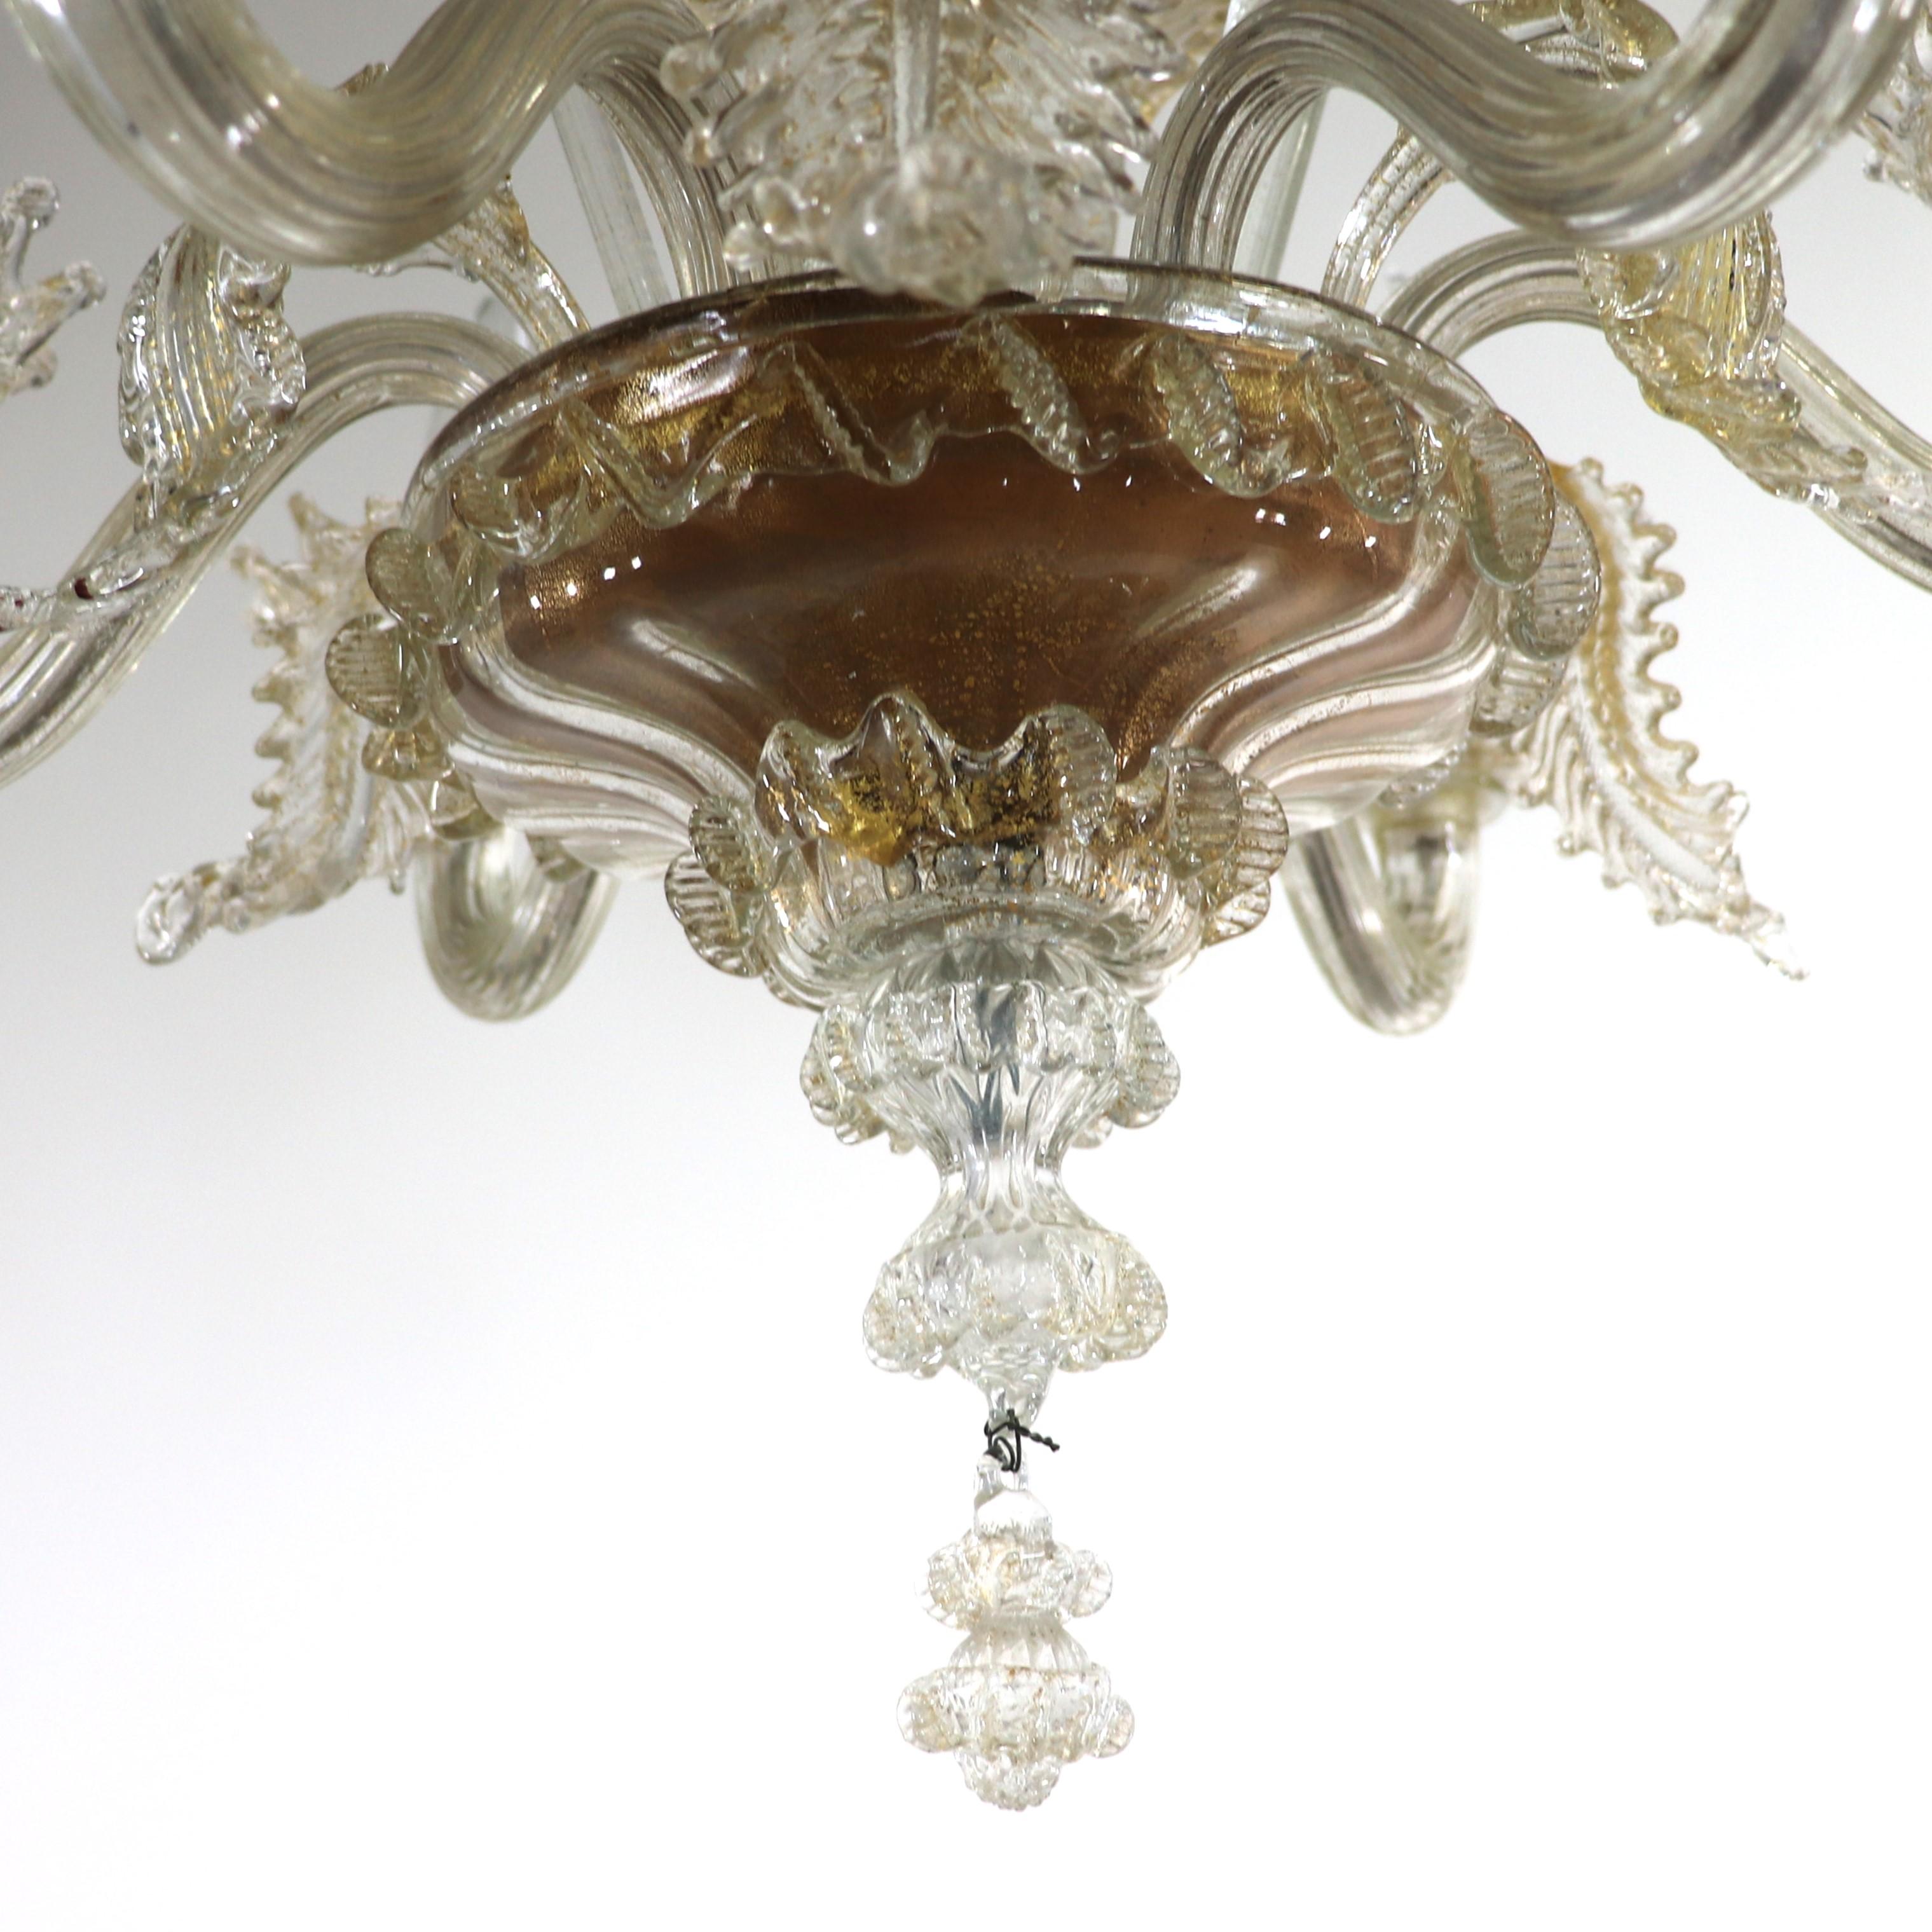  Vintage Baroque Style Gold Infused Cristallo Murano Chandelier For Sale 7